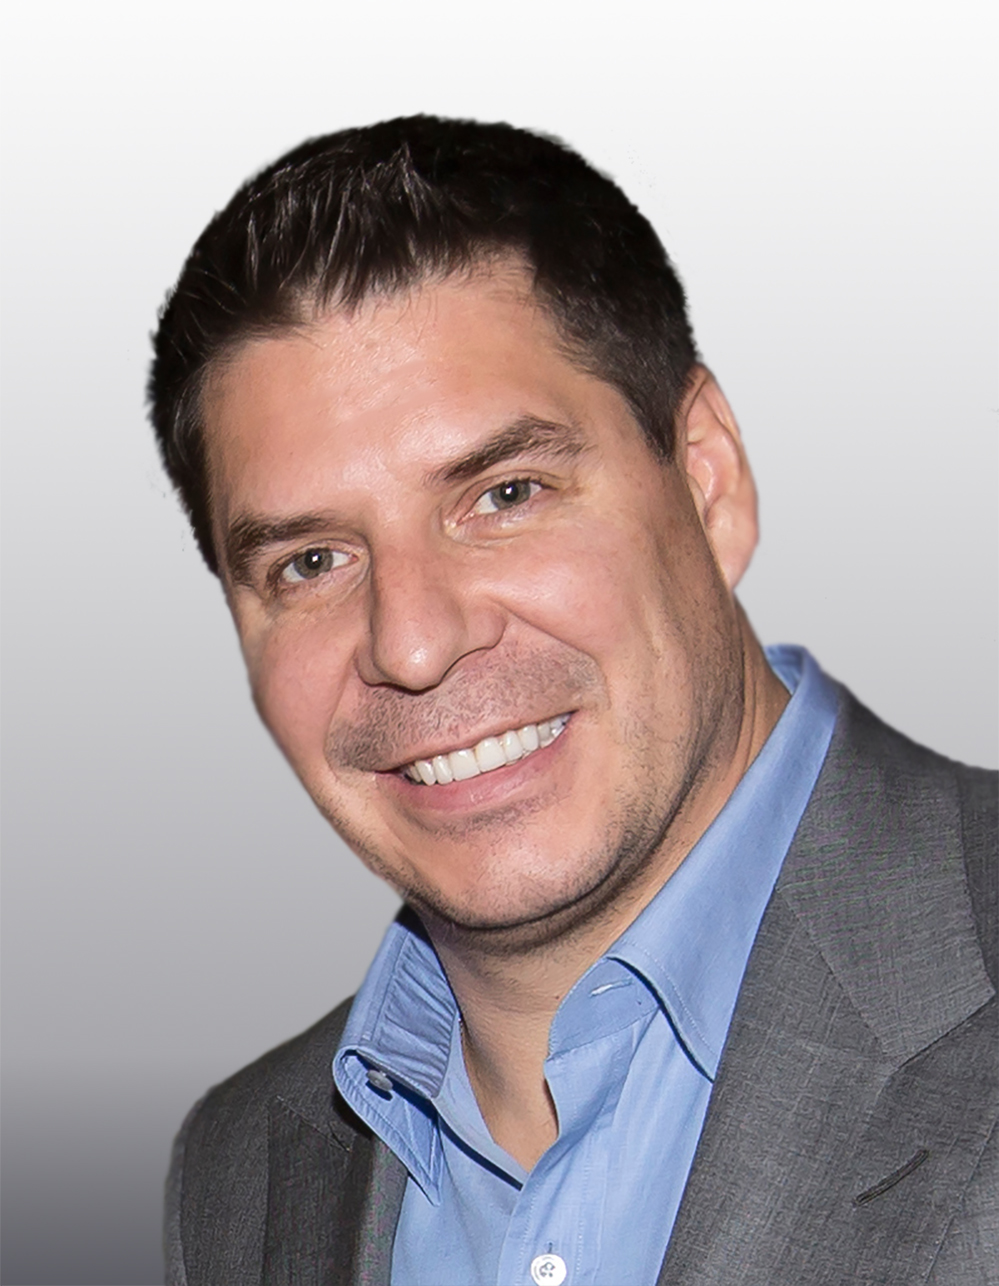 Sprint Names Marcelo Claure as New President and CEO